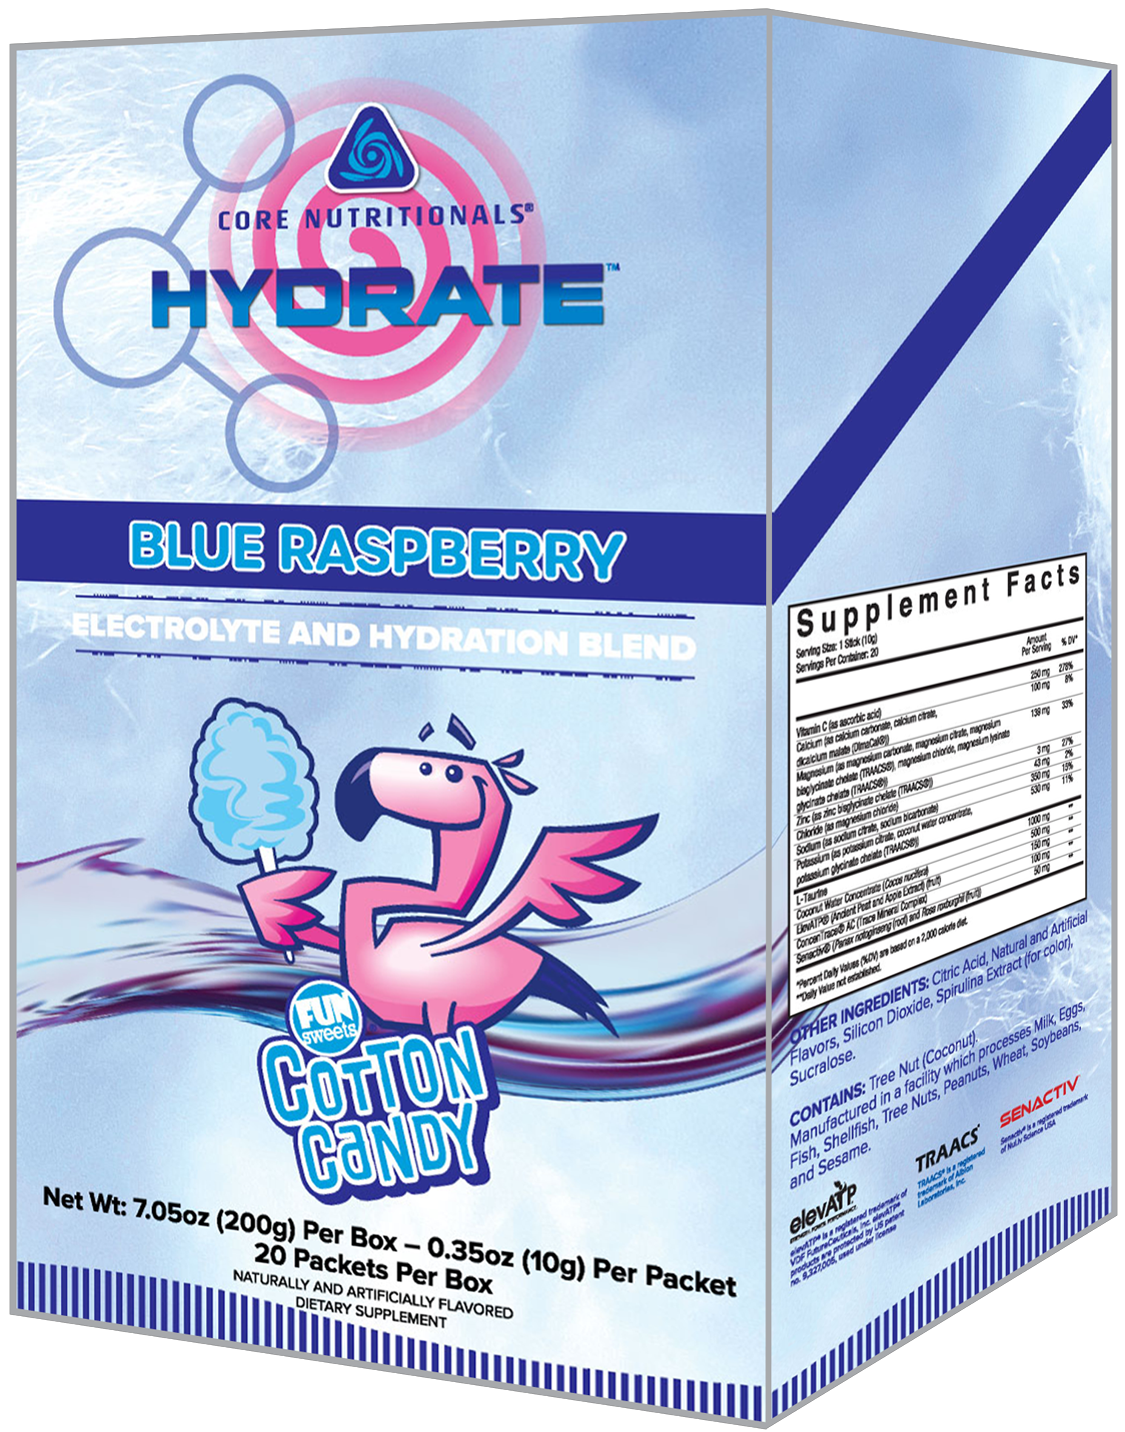 Core Nutritionals Hydrate Fun Sweets Blue Raspberry